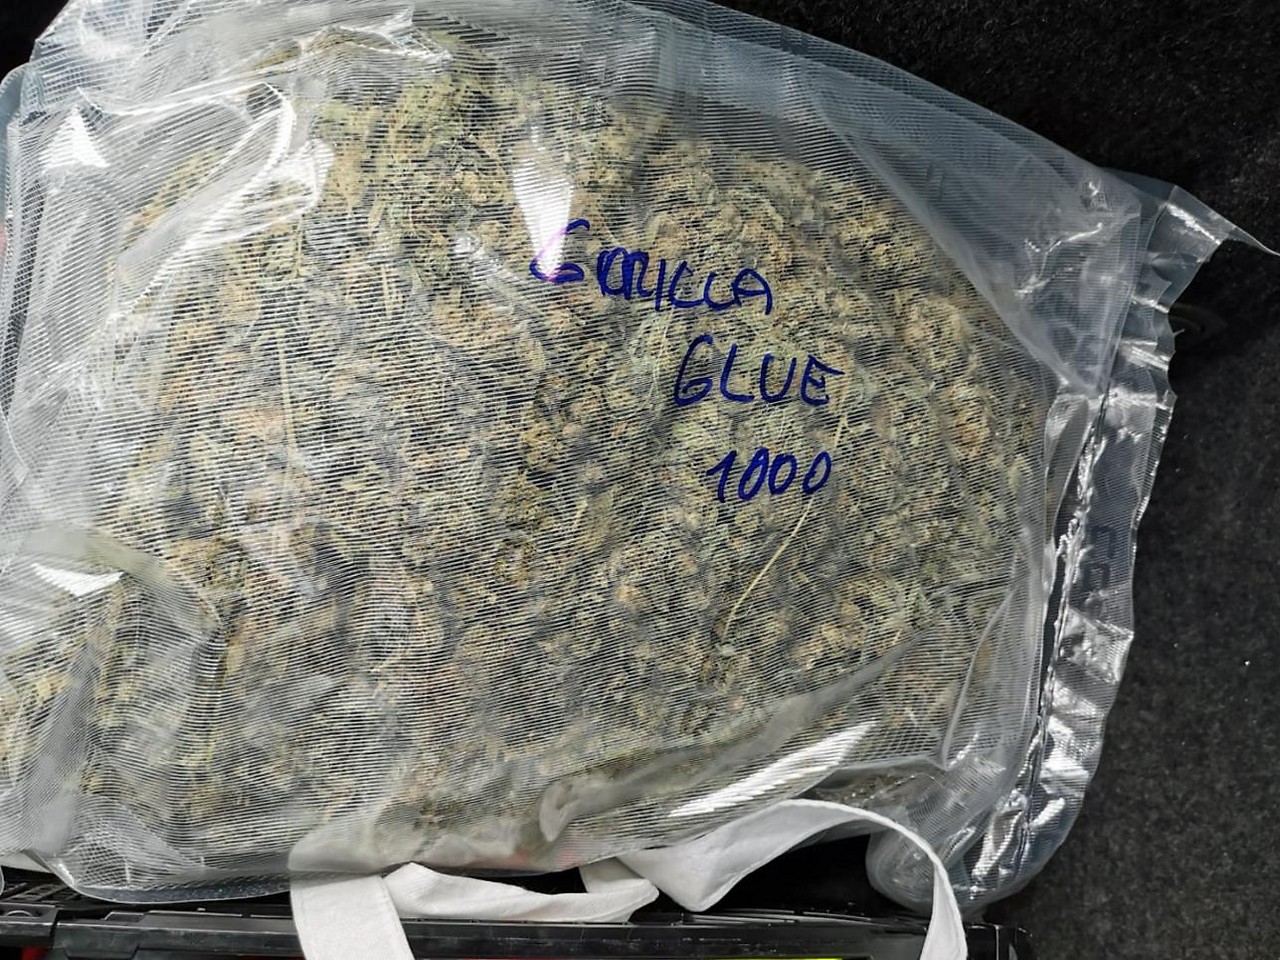 In Salzburg, the police have uncovered another drug ring.  In total, about 132 kilograms of marijuana and other substances are involved.  The main perpetrators are two Syrians aged 23 and 27.  They ran a hairdressing salon and a fruit and vegetable store.  So far, nine suspects have been arrested, and a total of 17 young men are said to belong to the gang. 